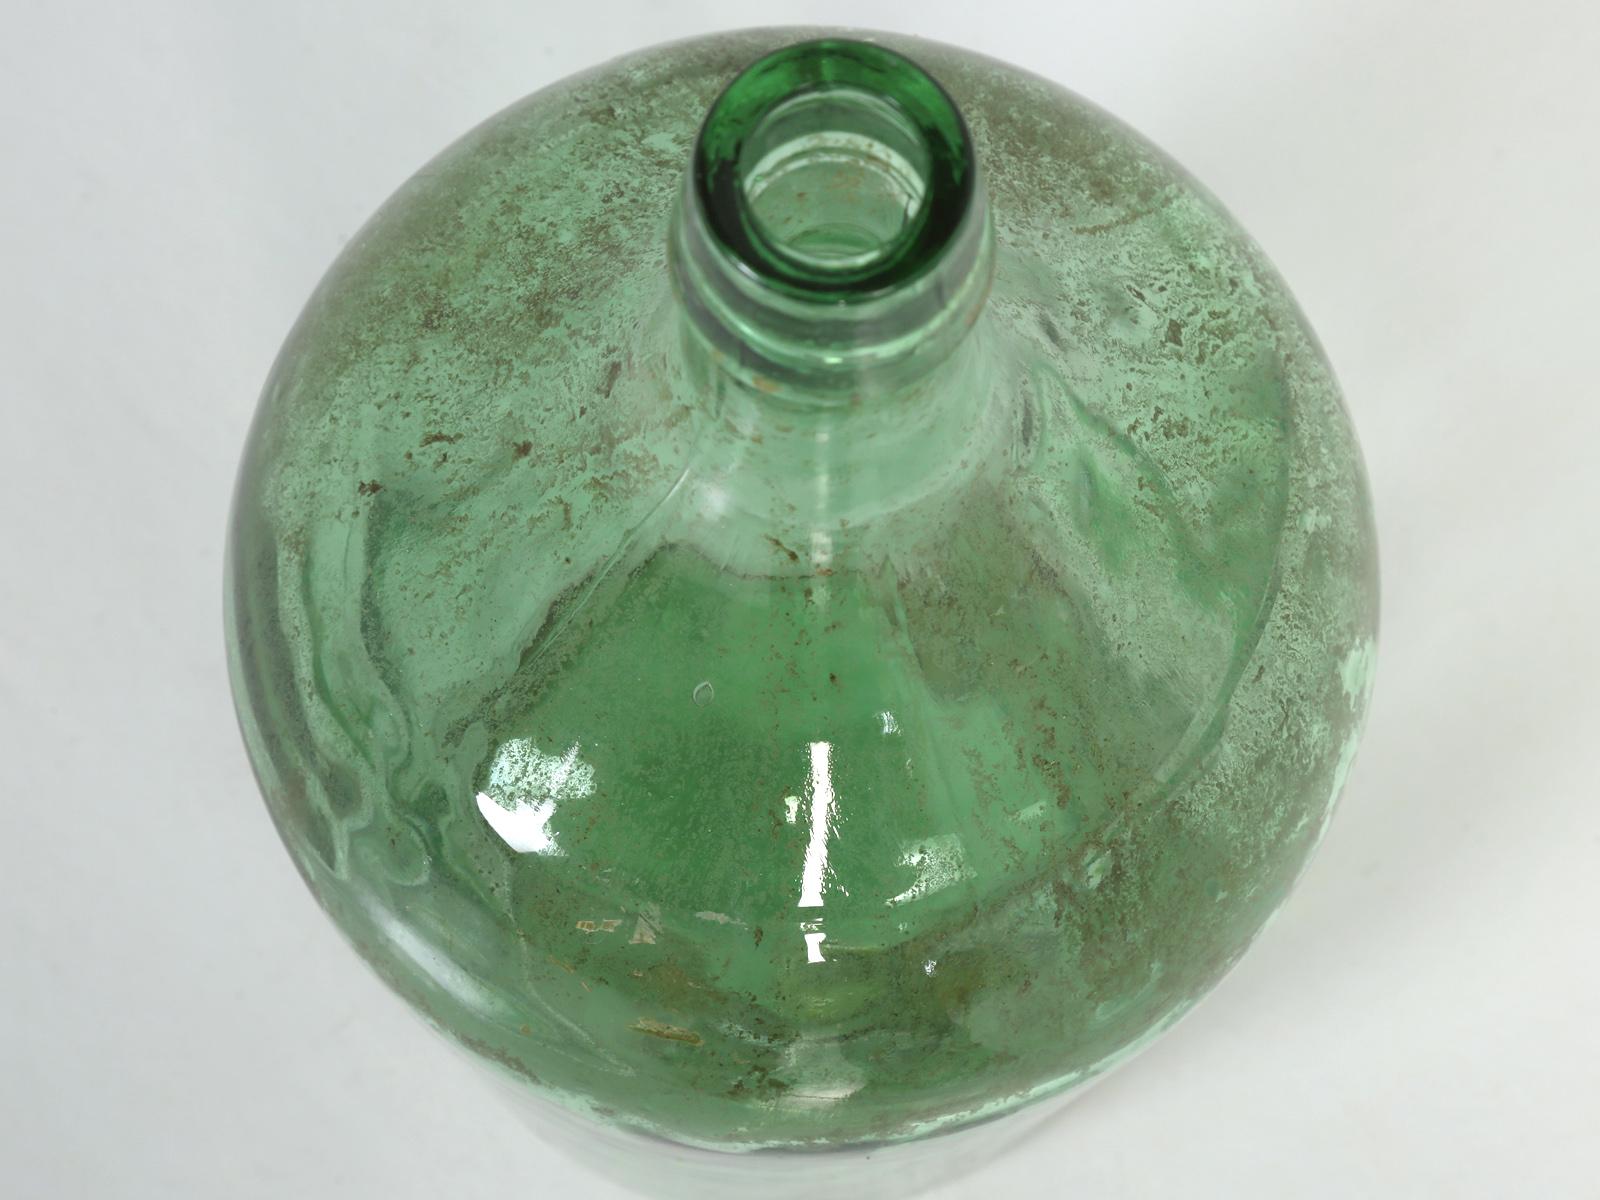 French Antique Demijohn from France